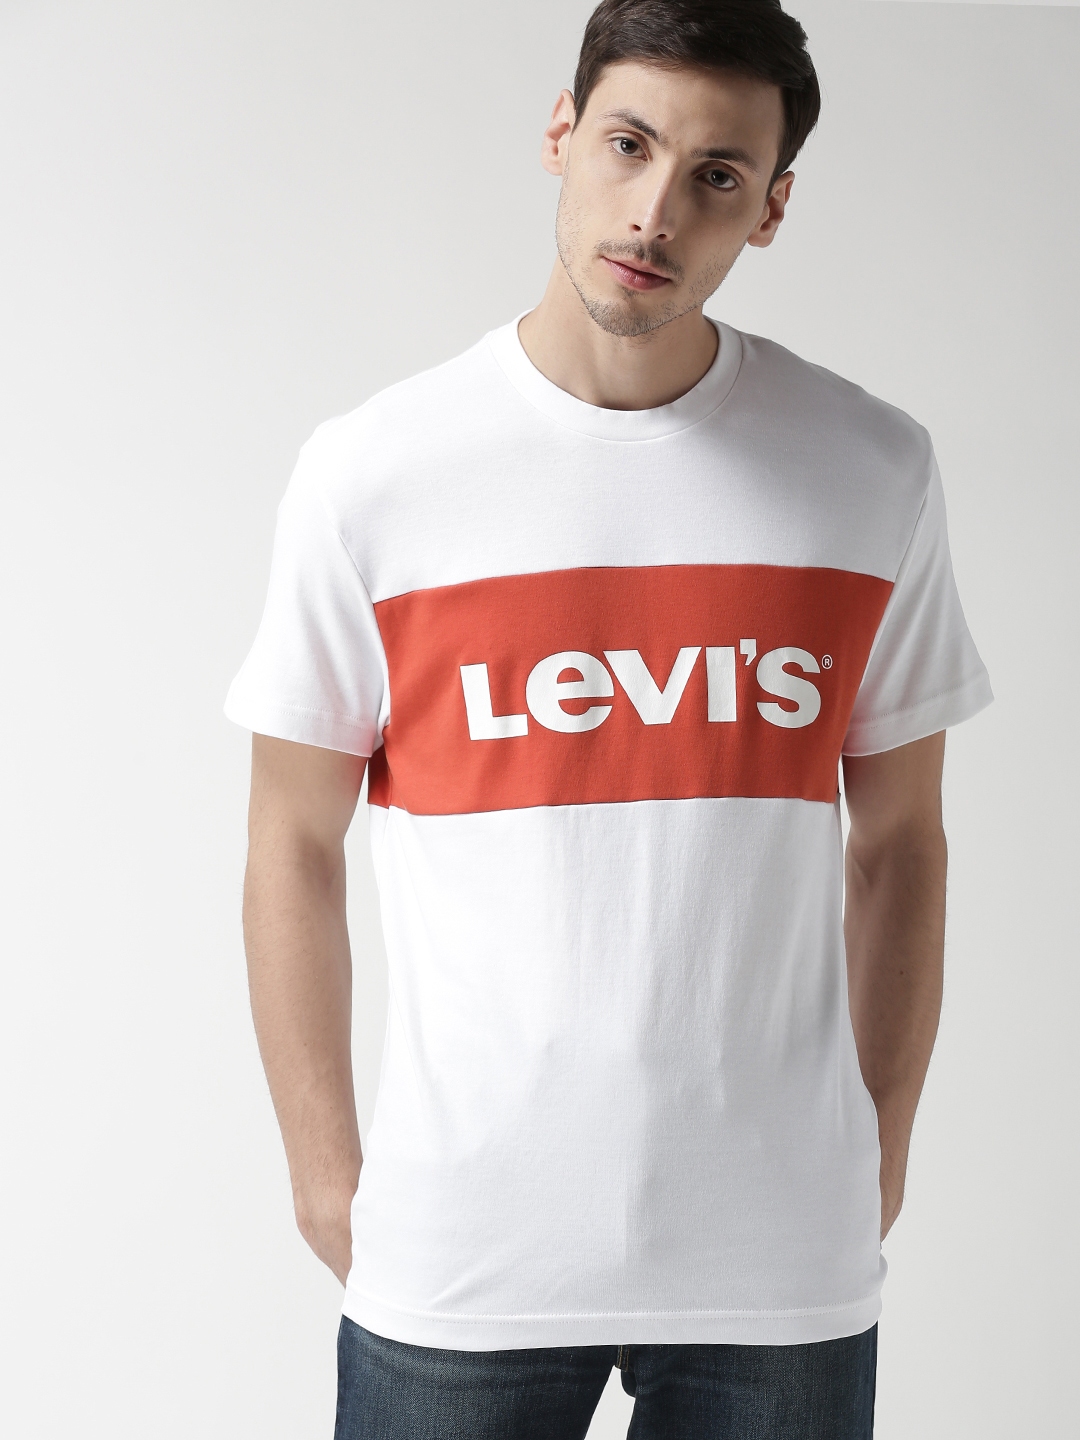 Buy Levis Men White & Red Printed Round Neck T Shirt - Tshirts for Men  6841040 | Myntra